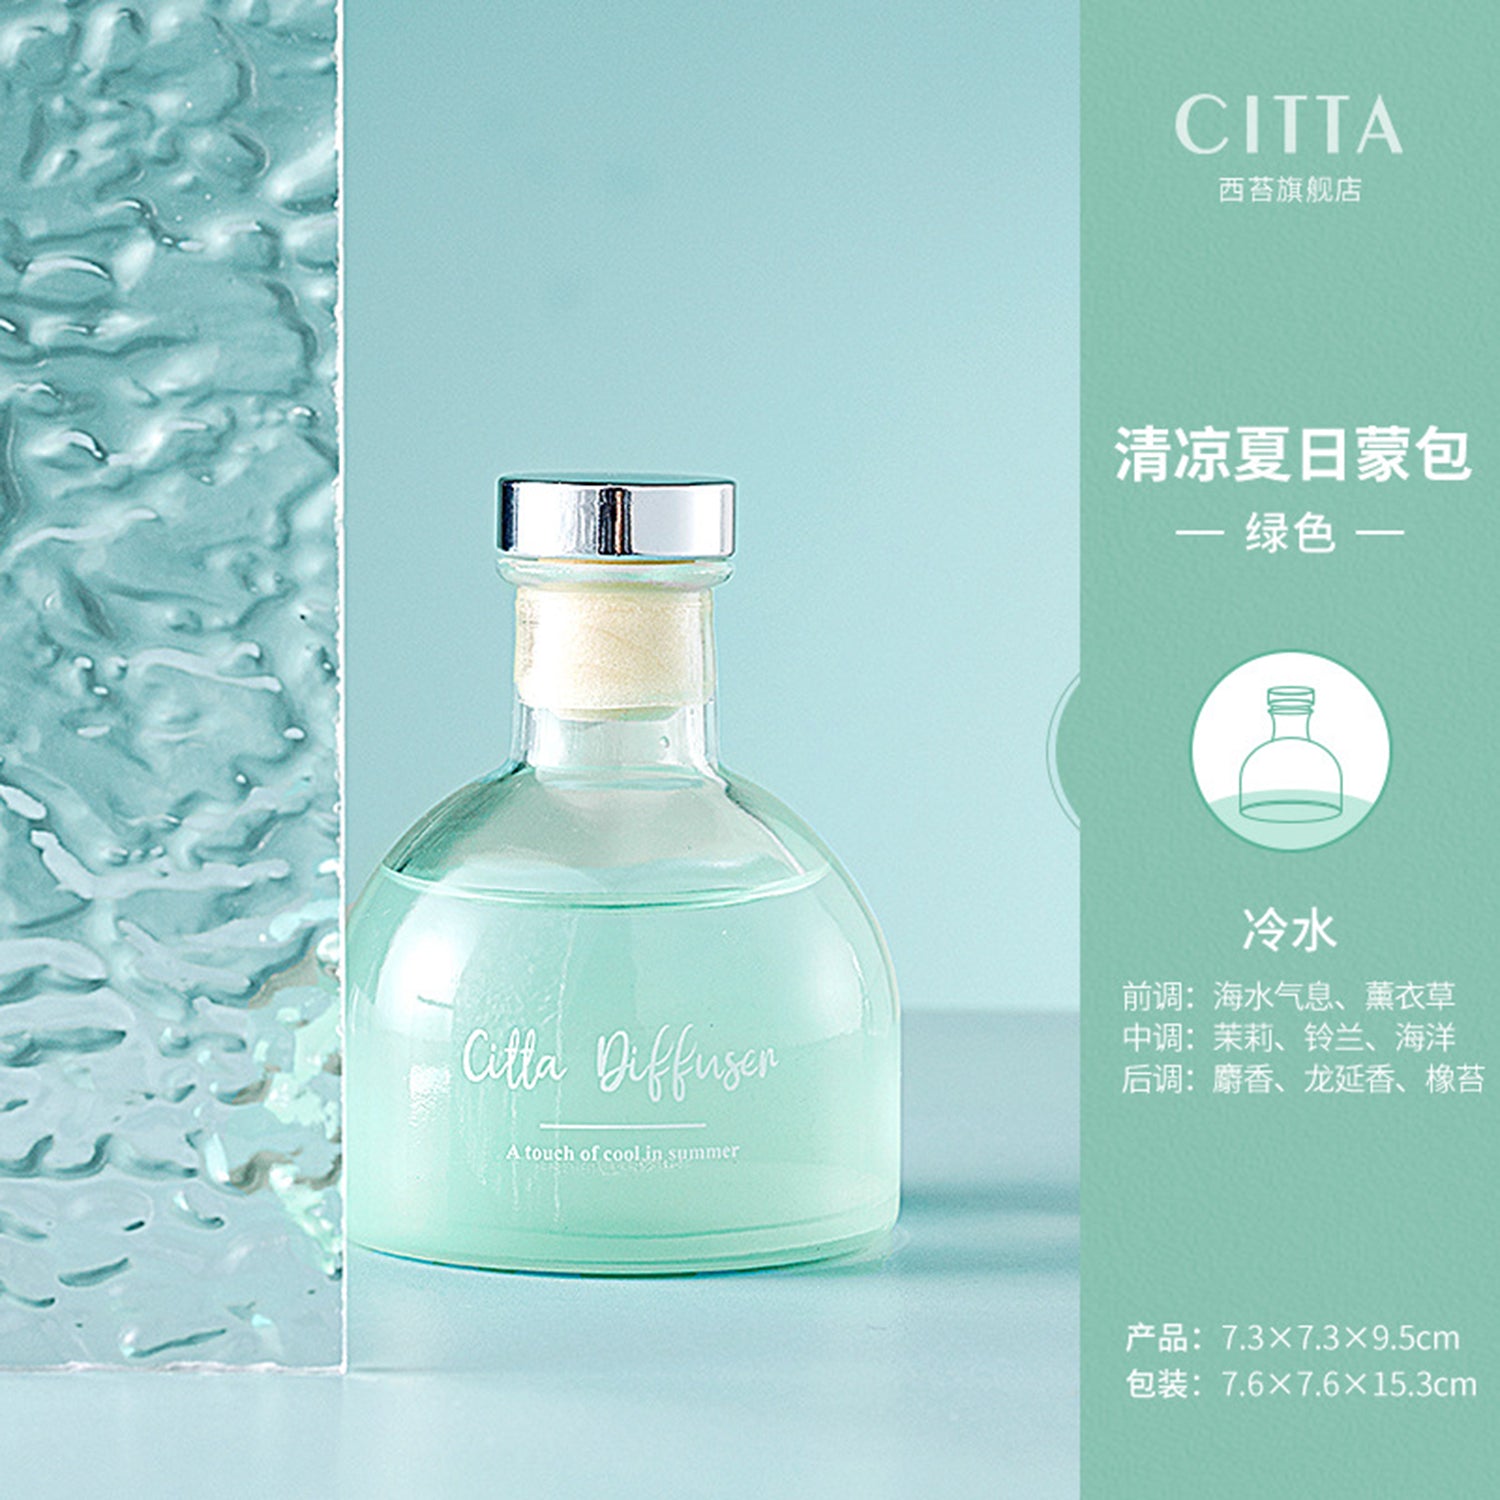 CITTA Cool Summer Series Reed Diffuser Aromatherapy 100ML Premium Essential Oil with Reed Stick Reed Diffuser CITTA Green / Cold Water 